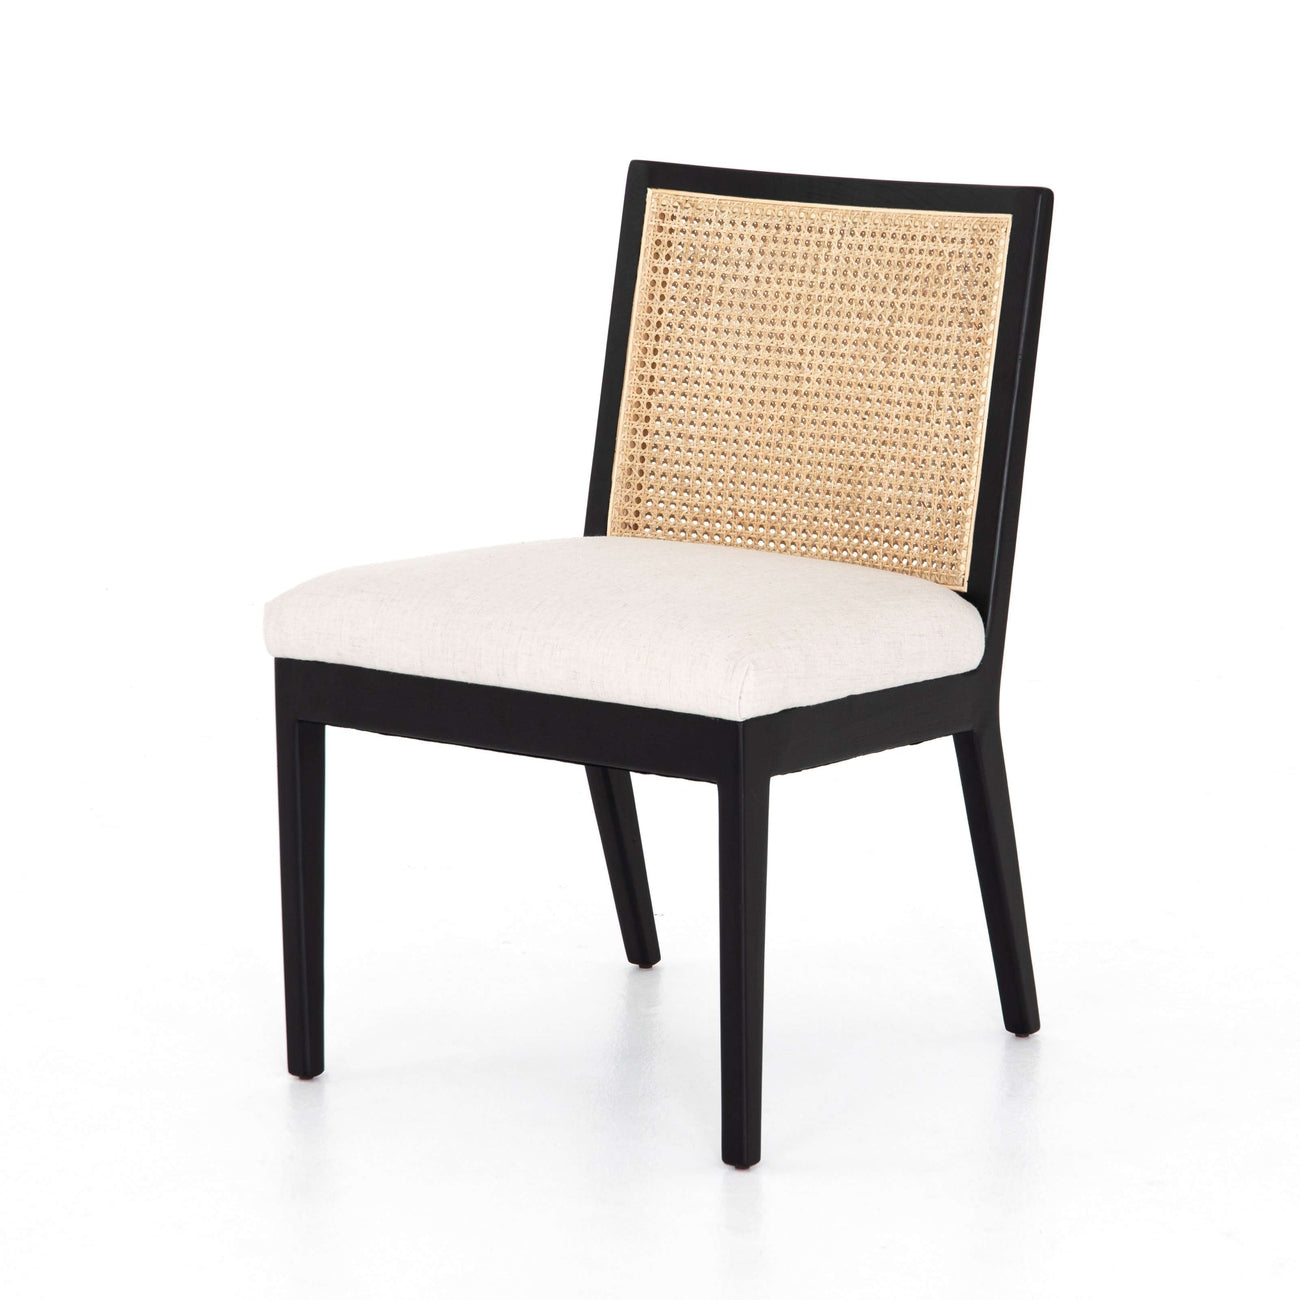 Four Hands, Antonia Cane Armless Dining Chair